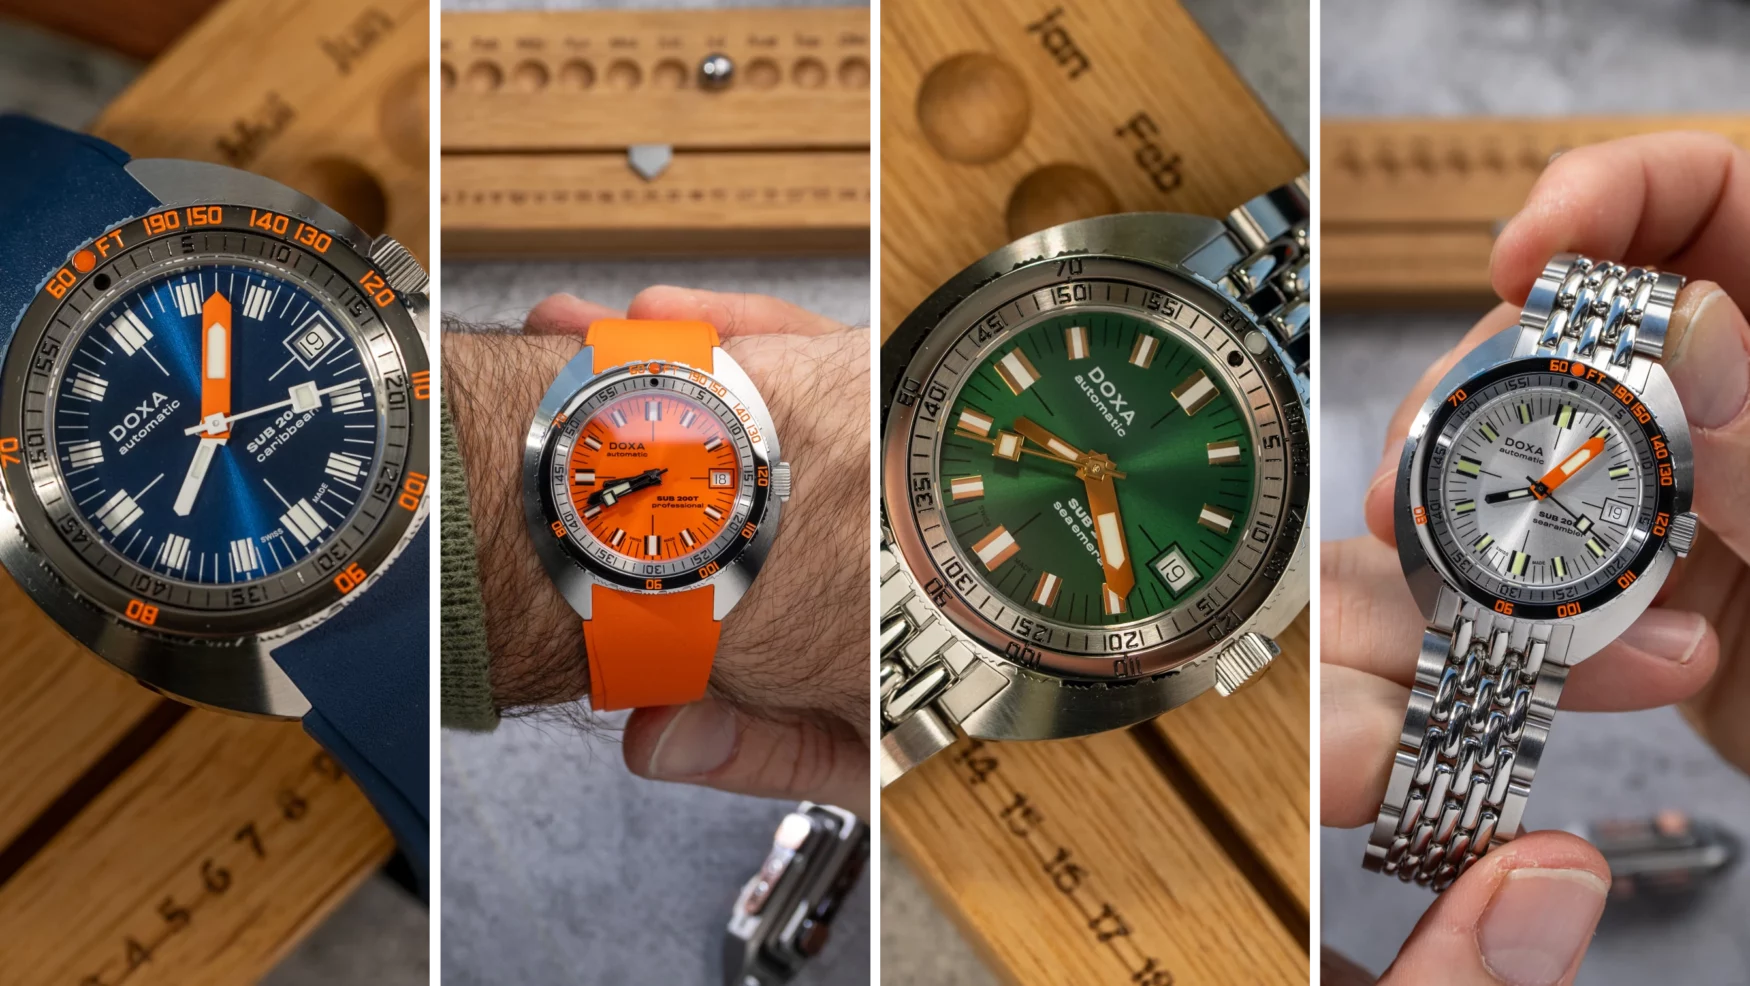 The Doxa SUB 200T is classic Doxa flavour in a smaller and cheaper package